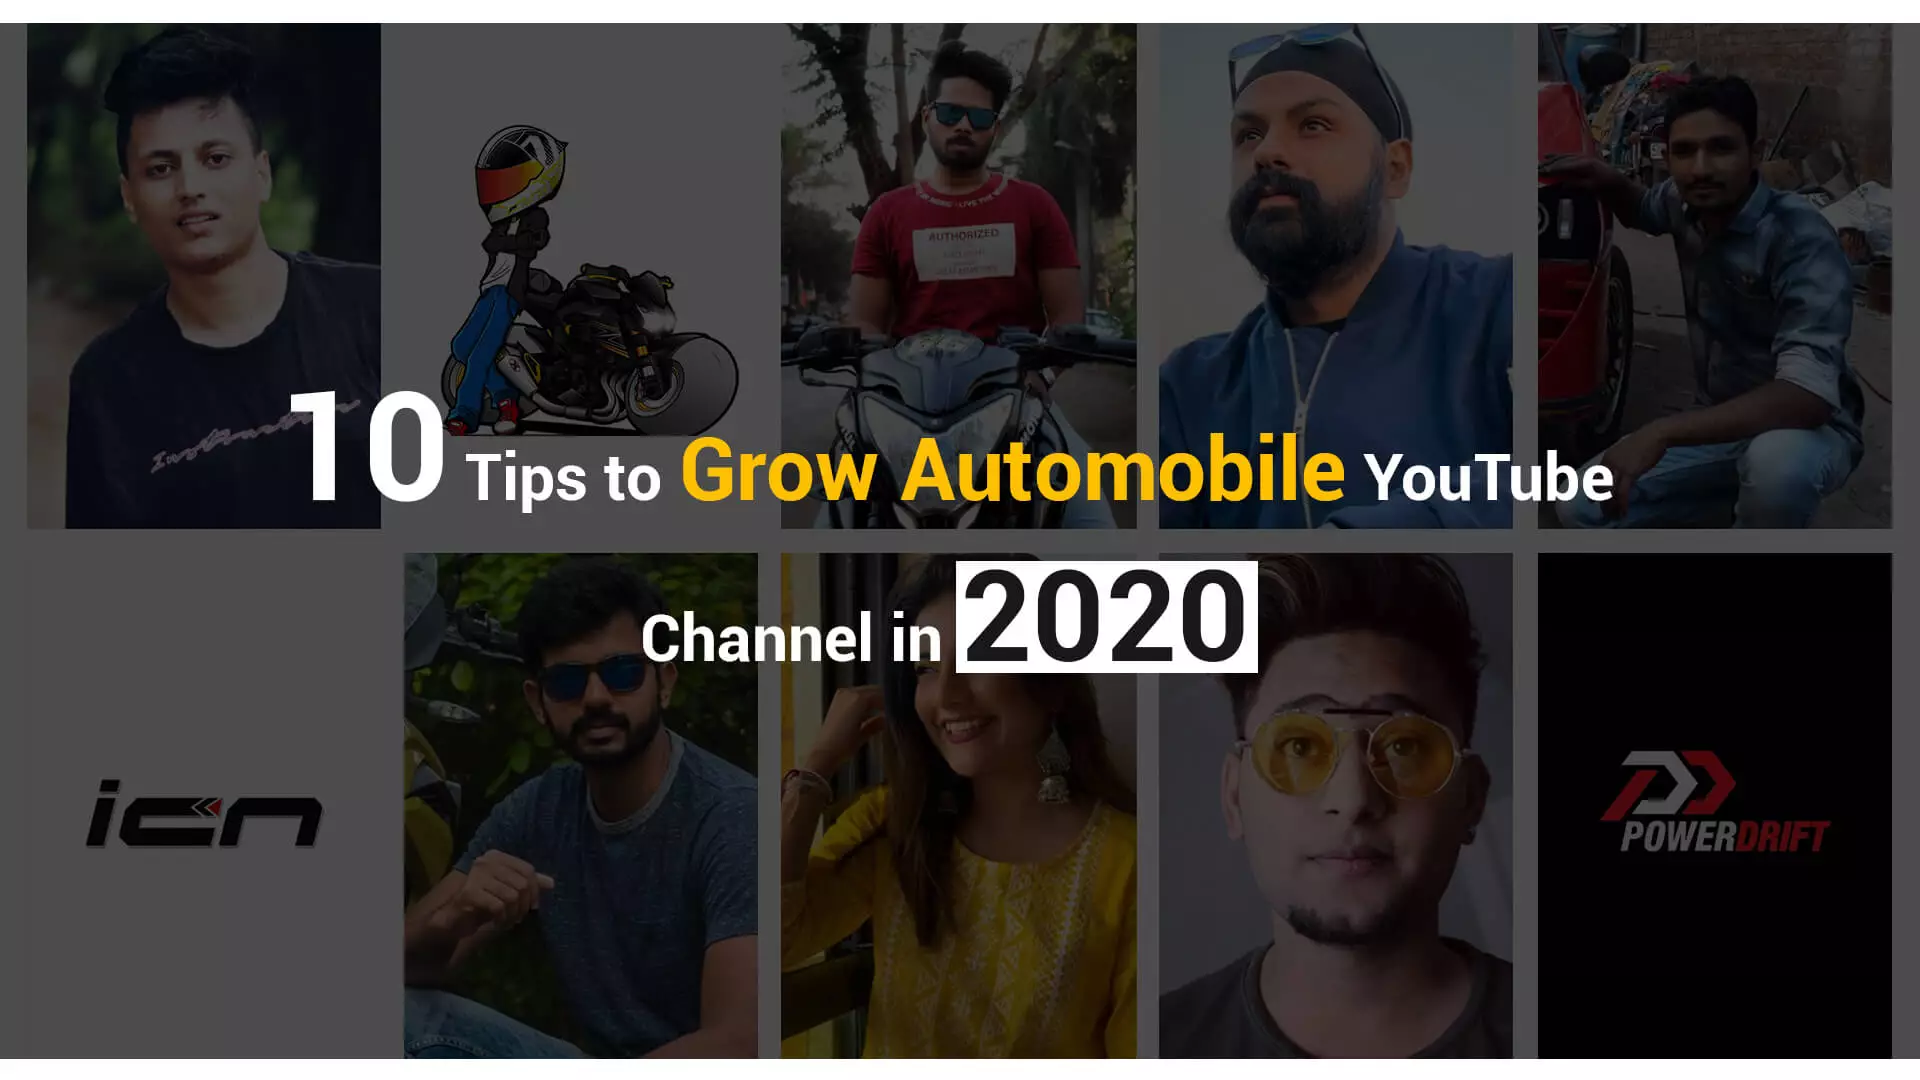 How to grow Automobile YouTube Channel